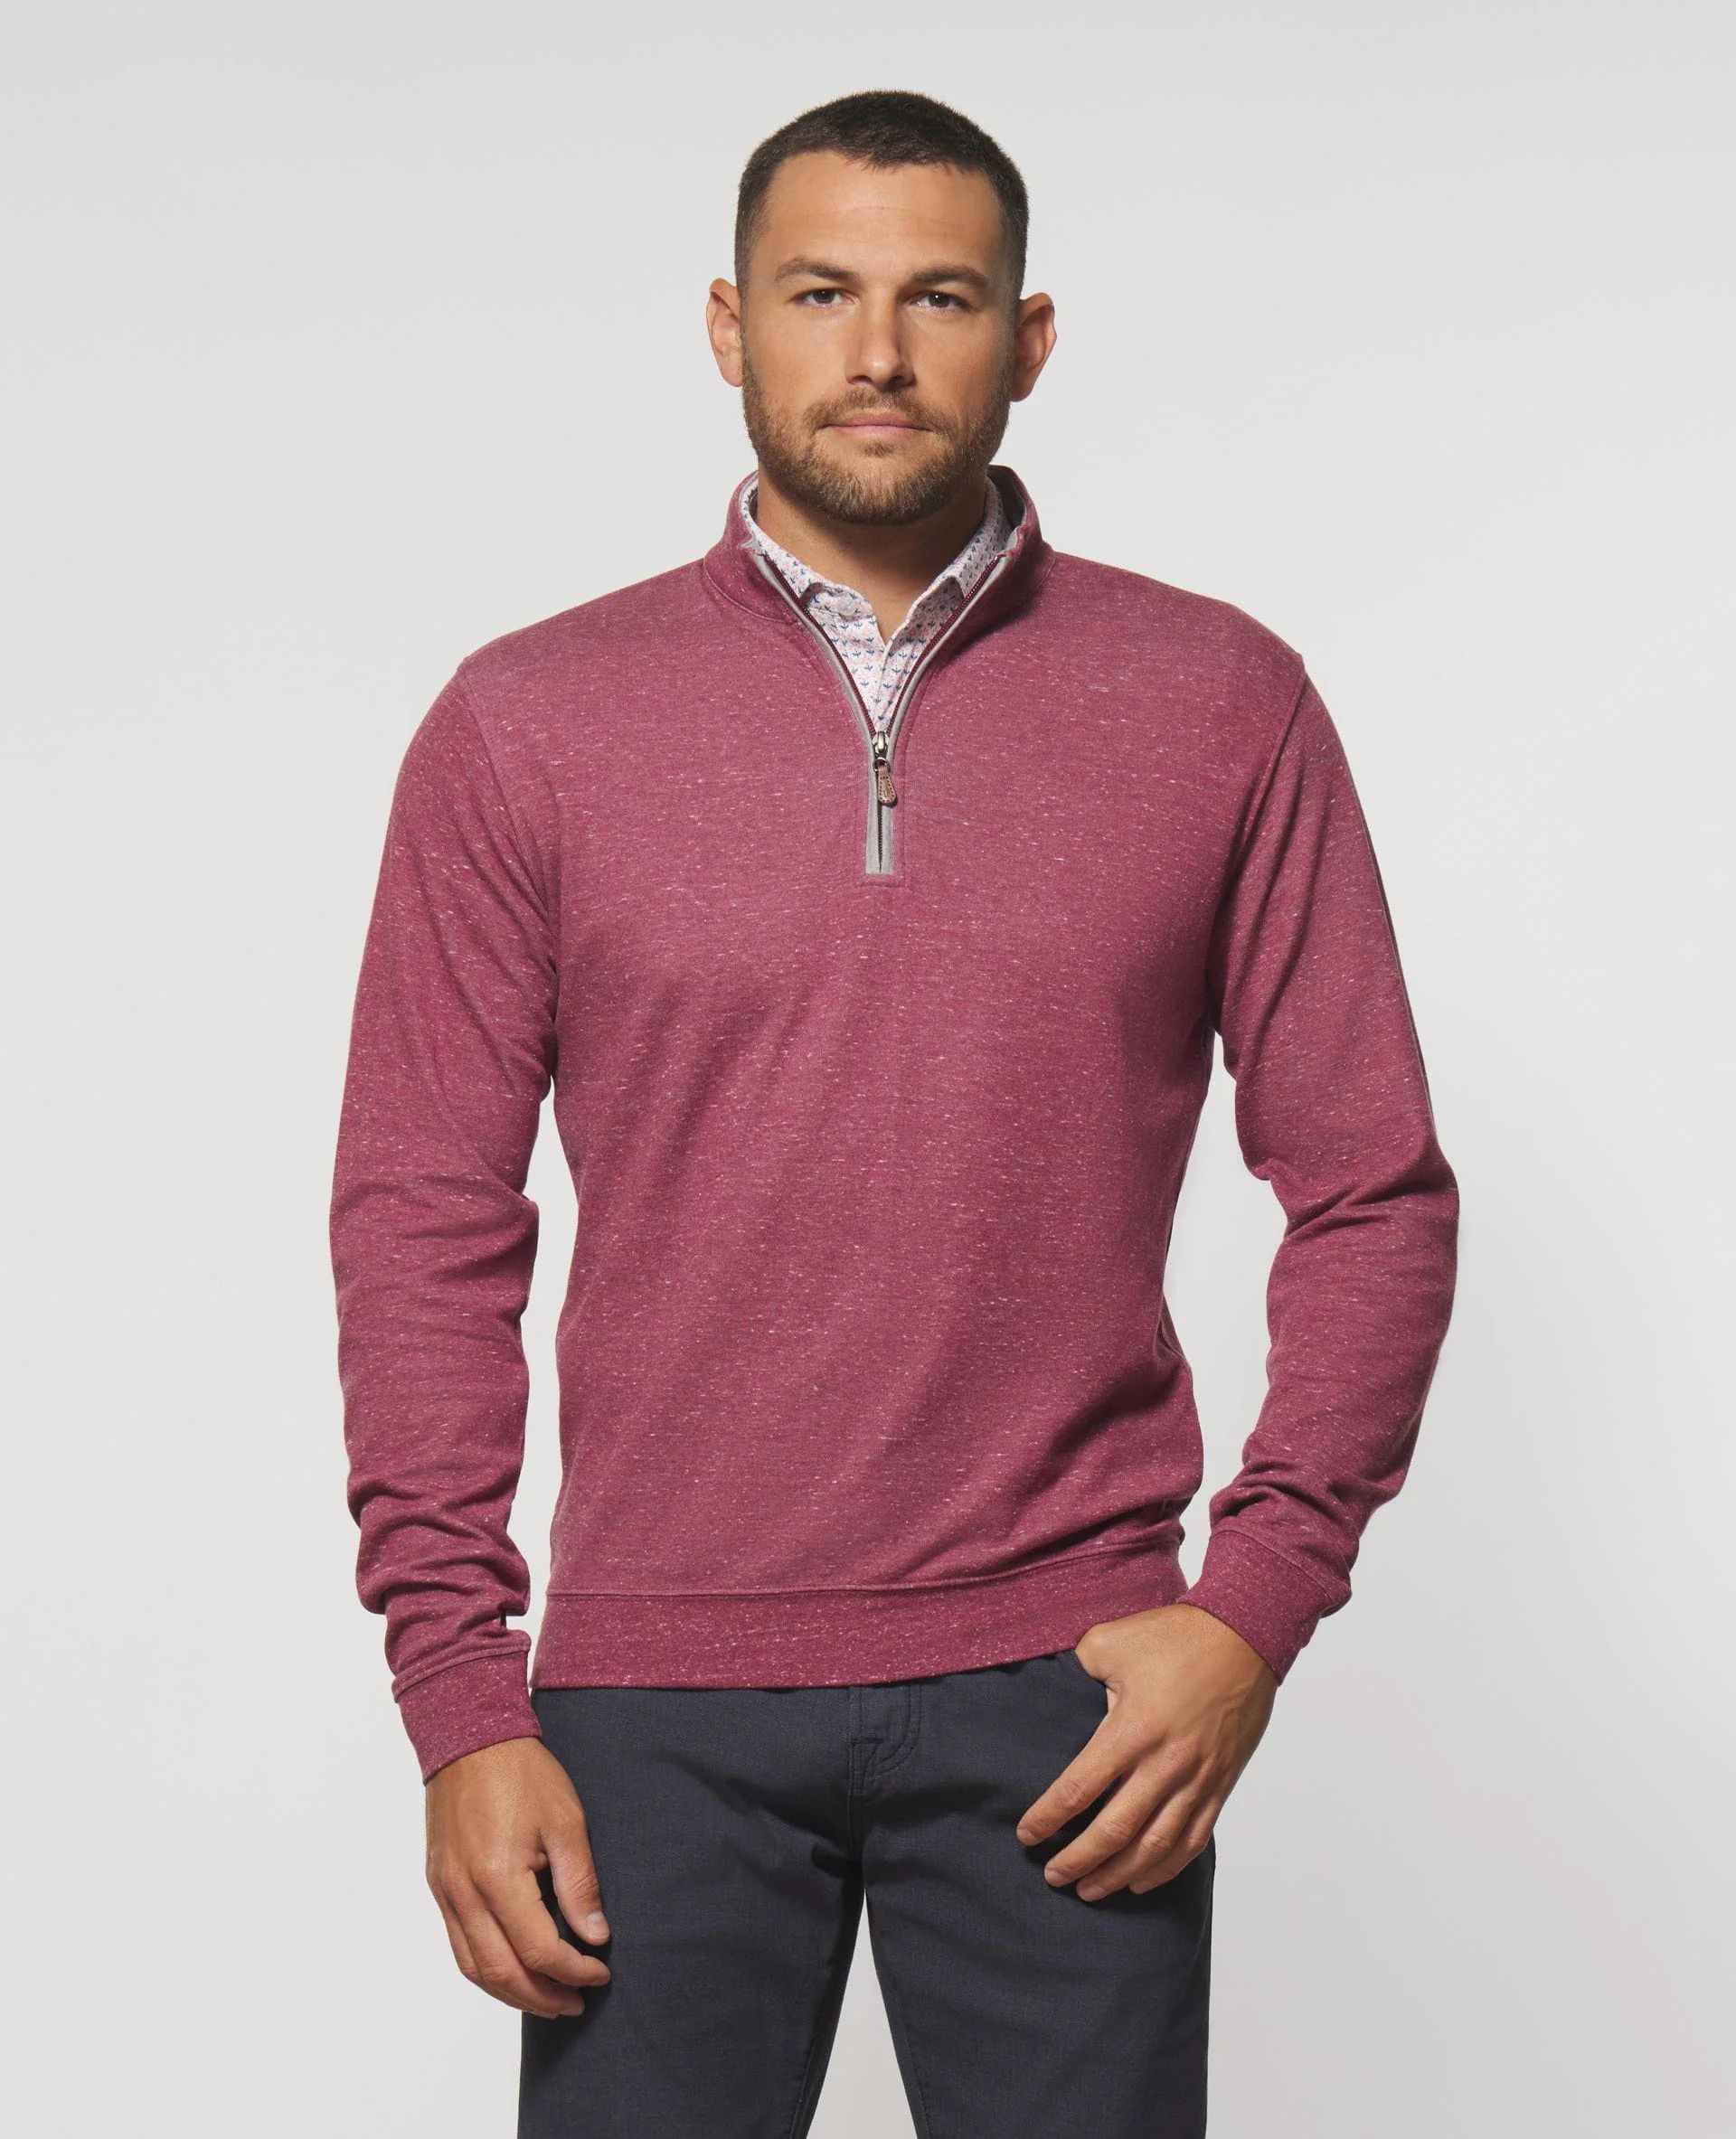 Men's 1/4 Zip Pullover - Business Casual Sweater | johnnie O